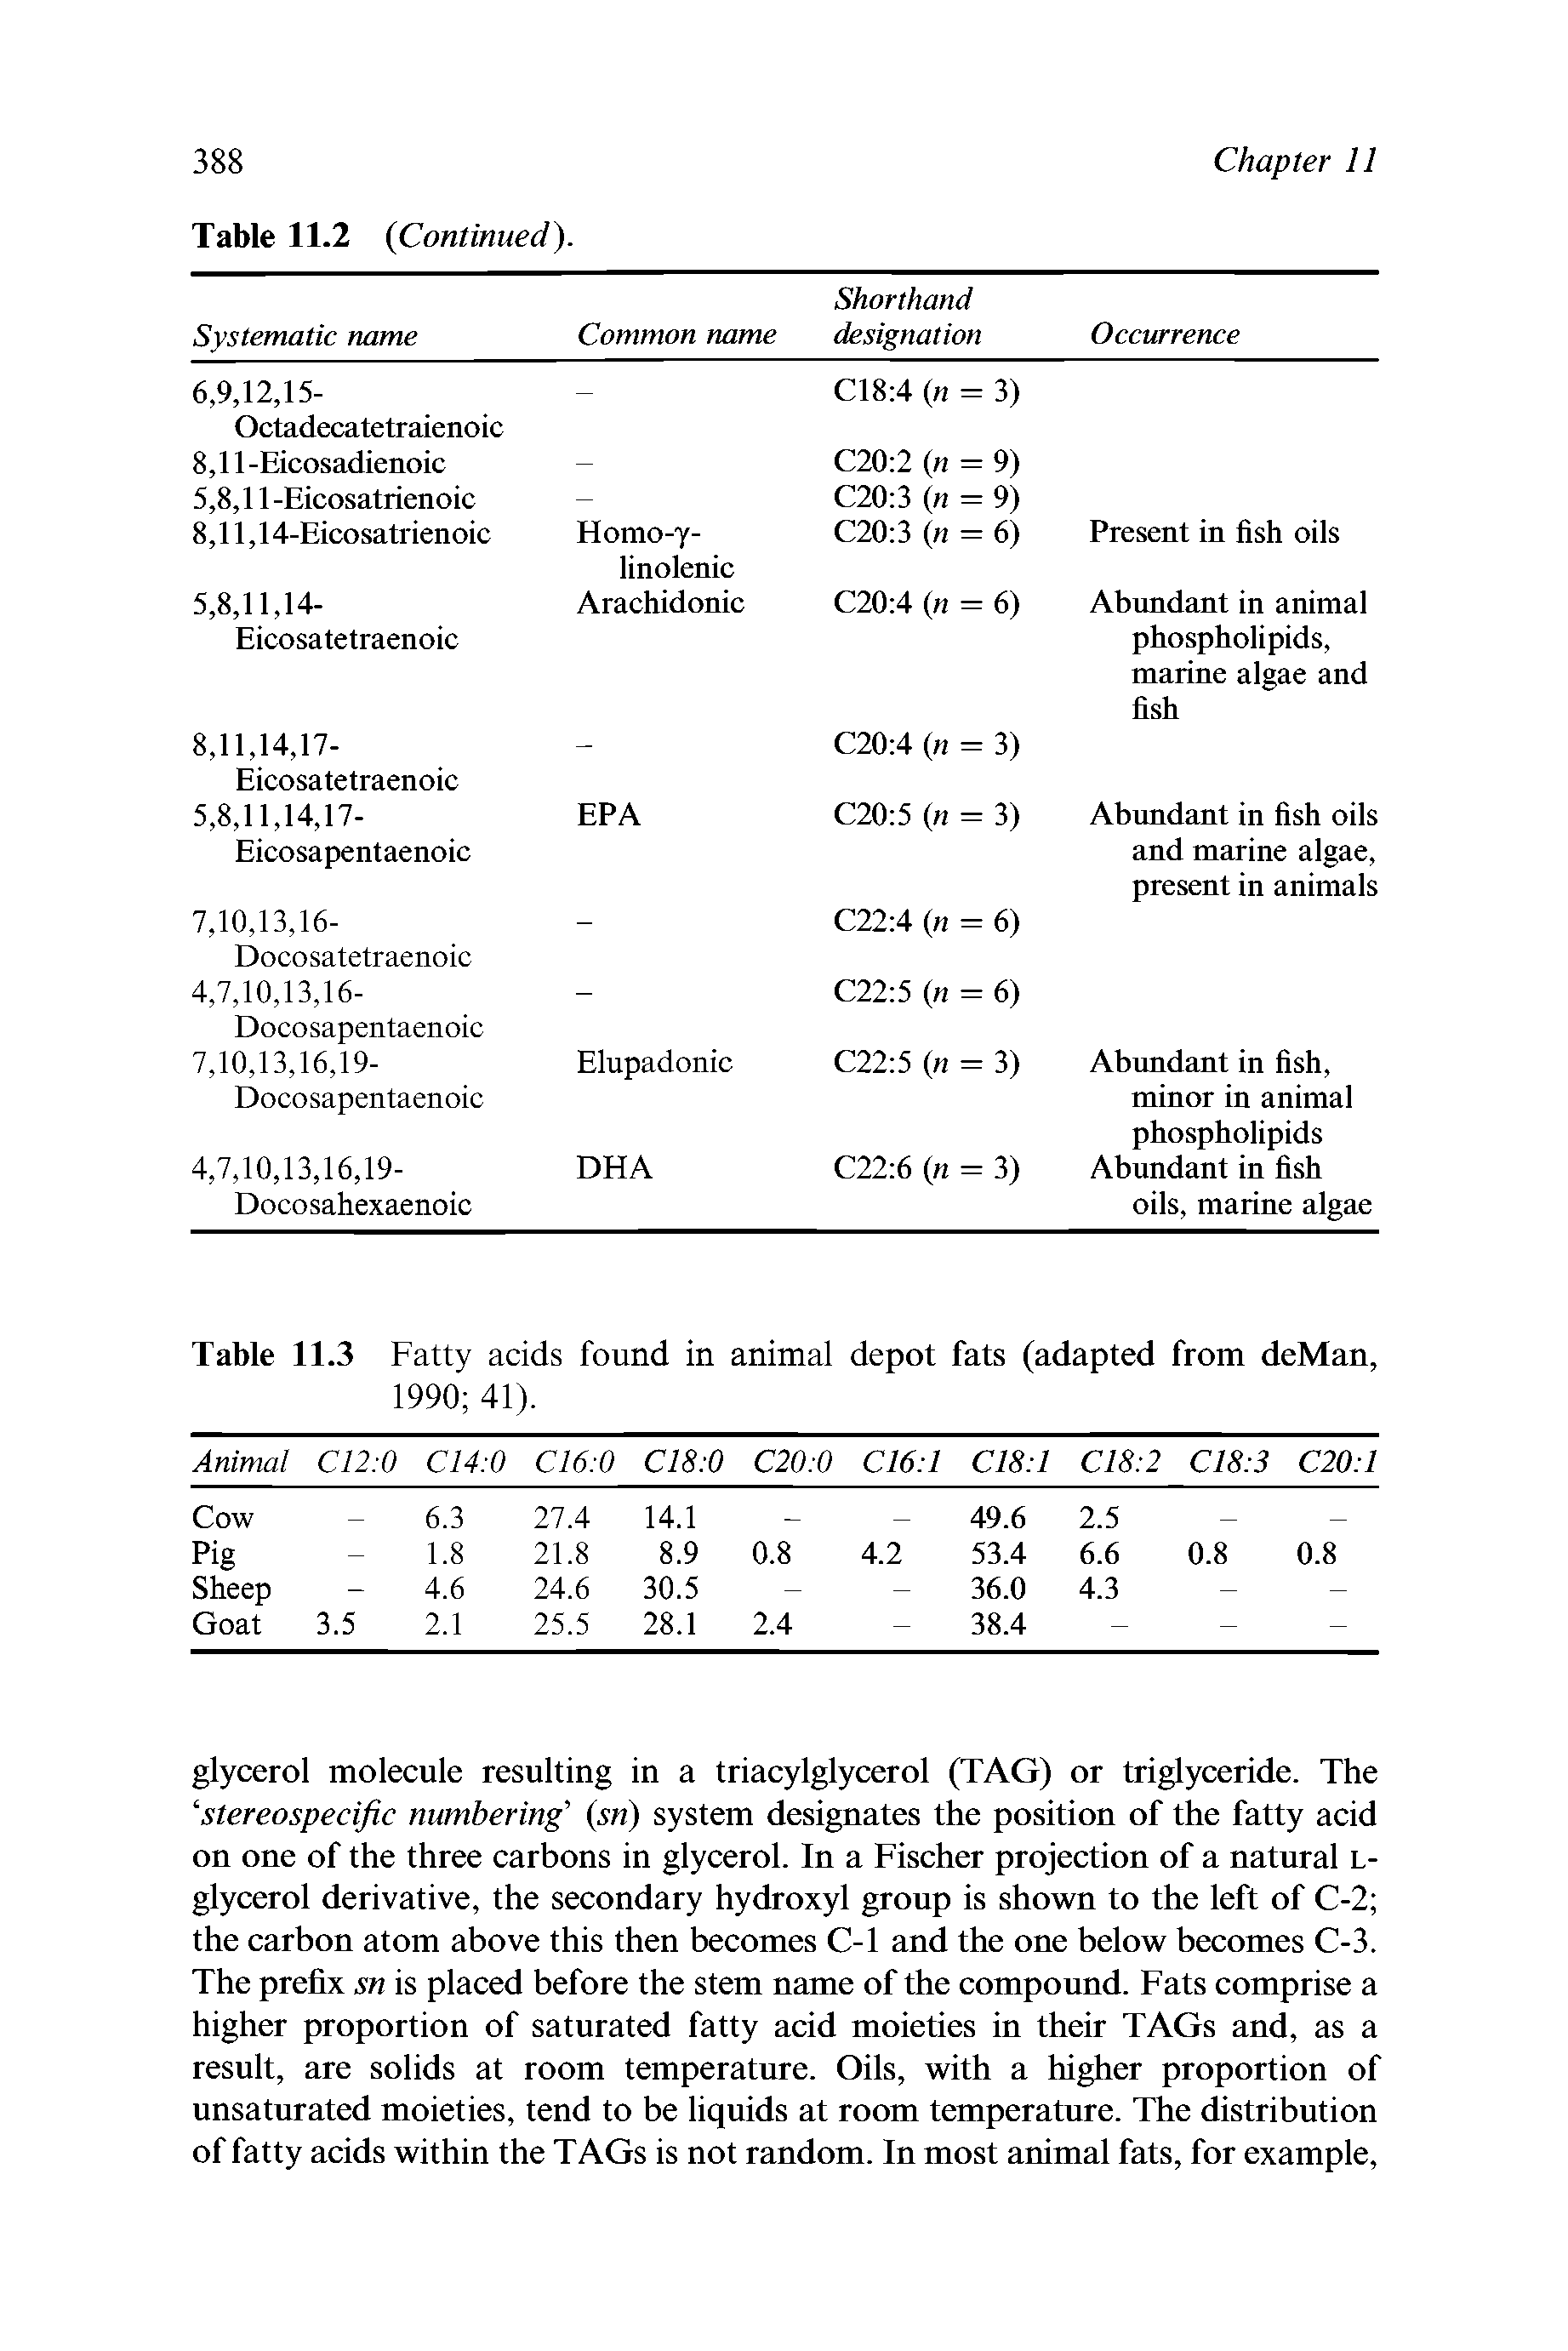 Table 11.3 Fatty acids found in animal depot fats (adapted from deMan, 1990 41).